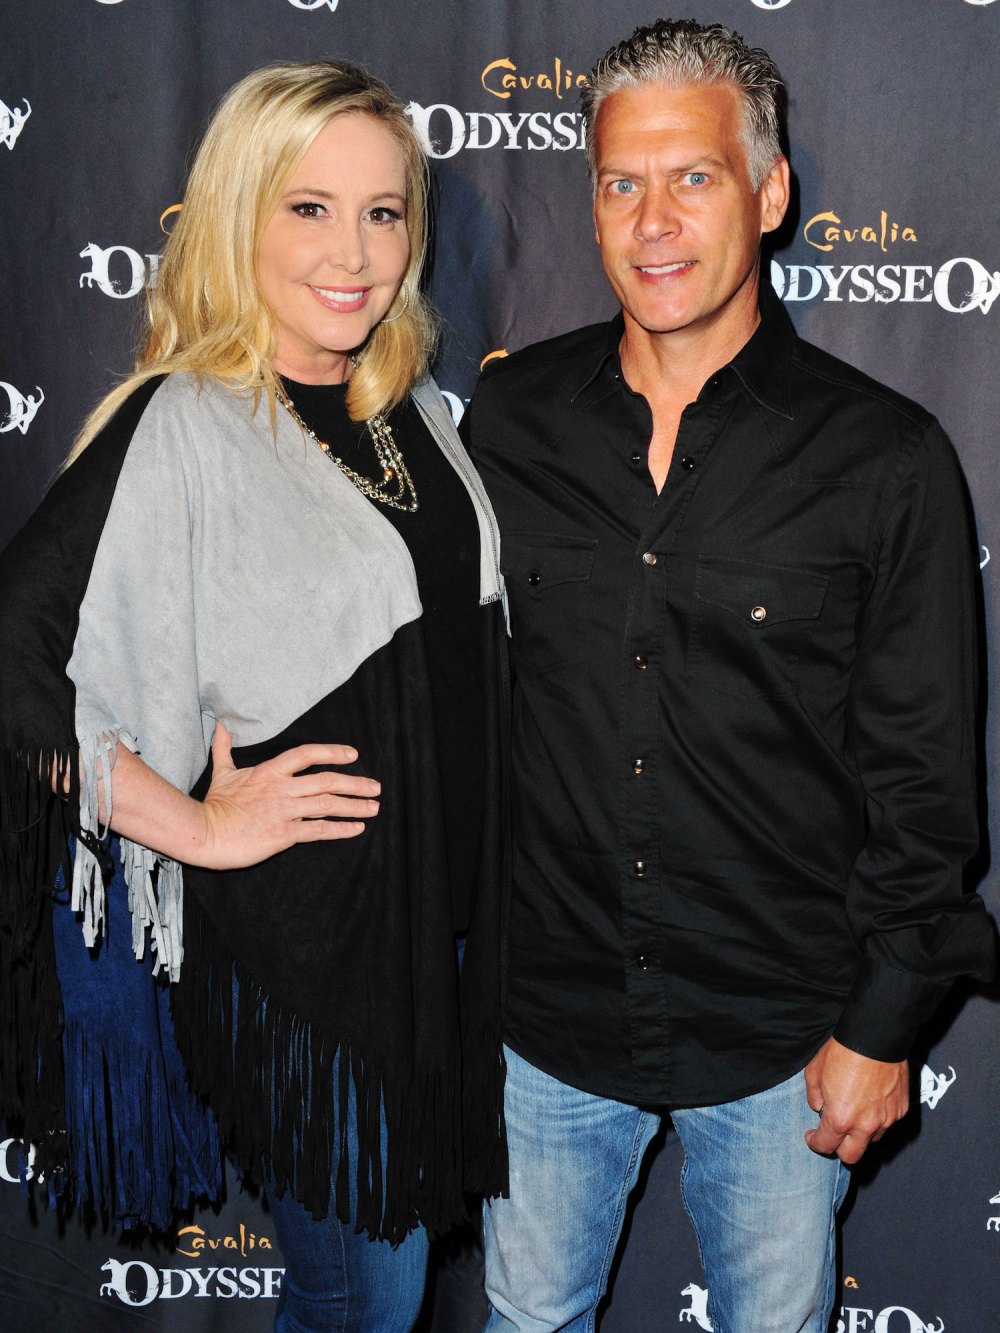 Shannon Beador Though RHOC Would Save Her Marriage to David Beador